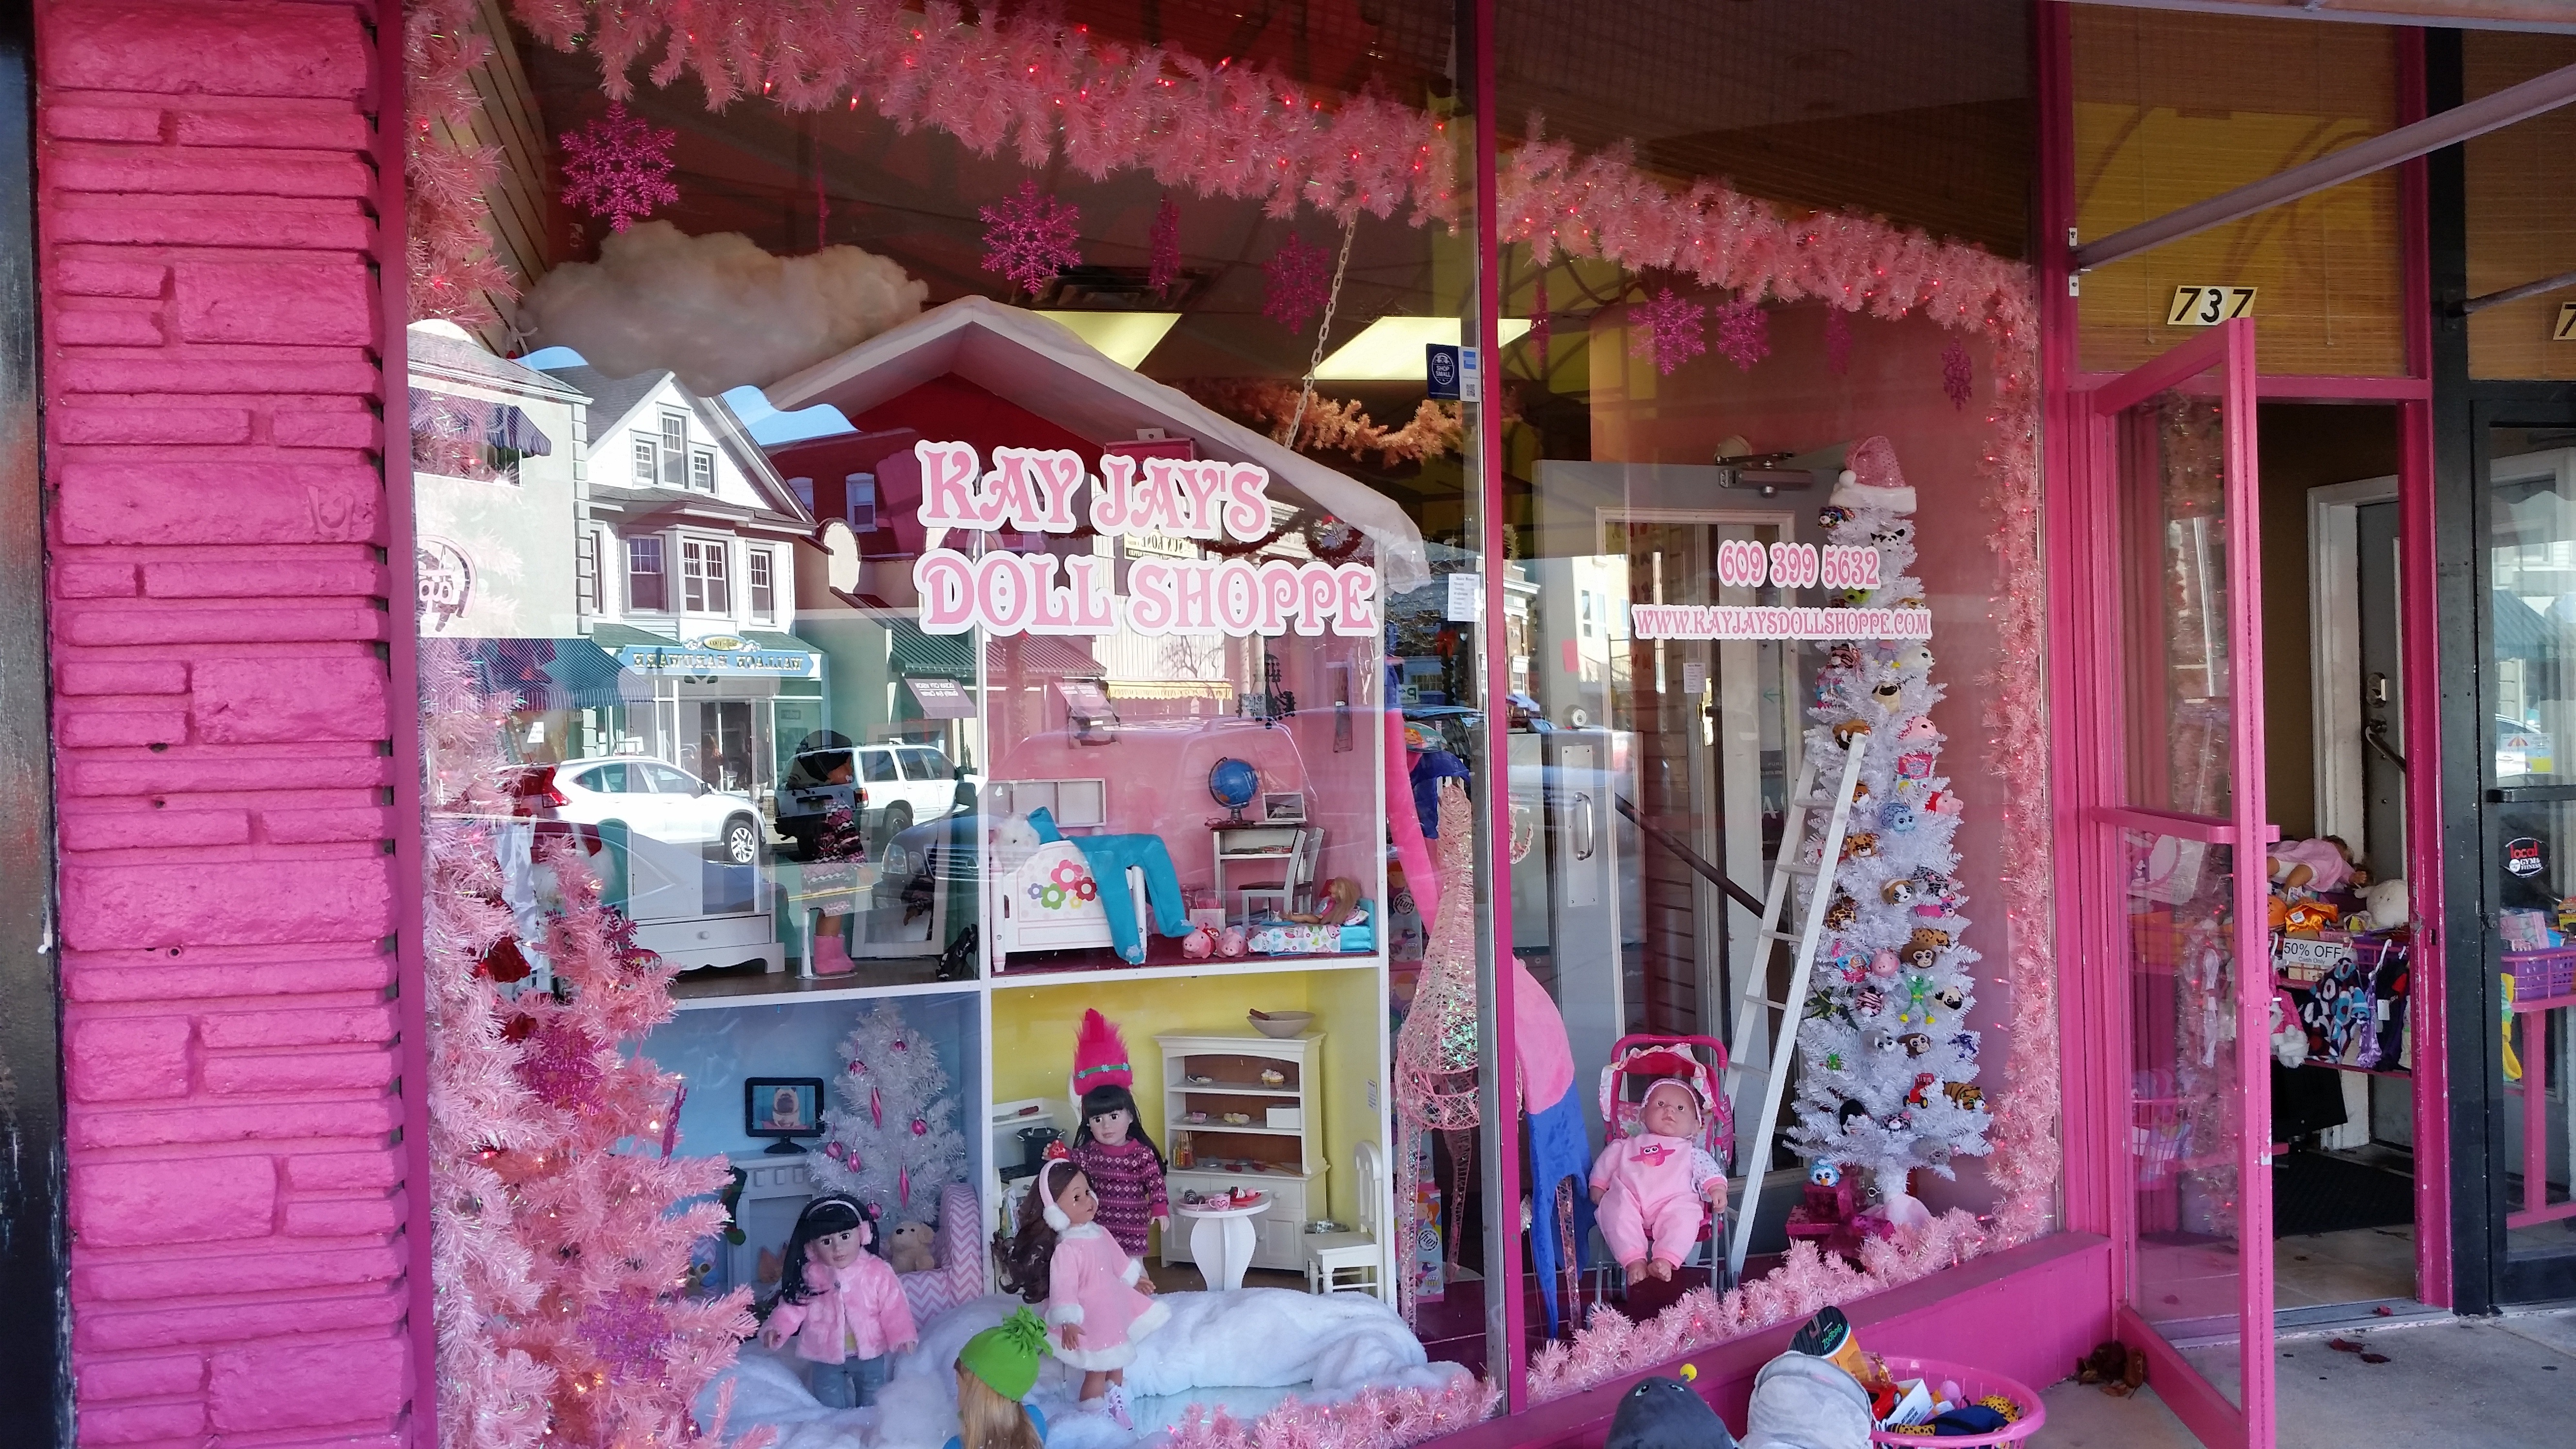 The storefront is part of the pink-dominated color scheme.